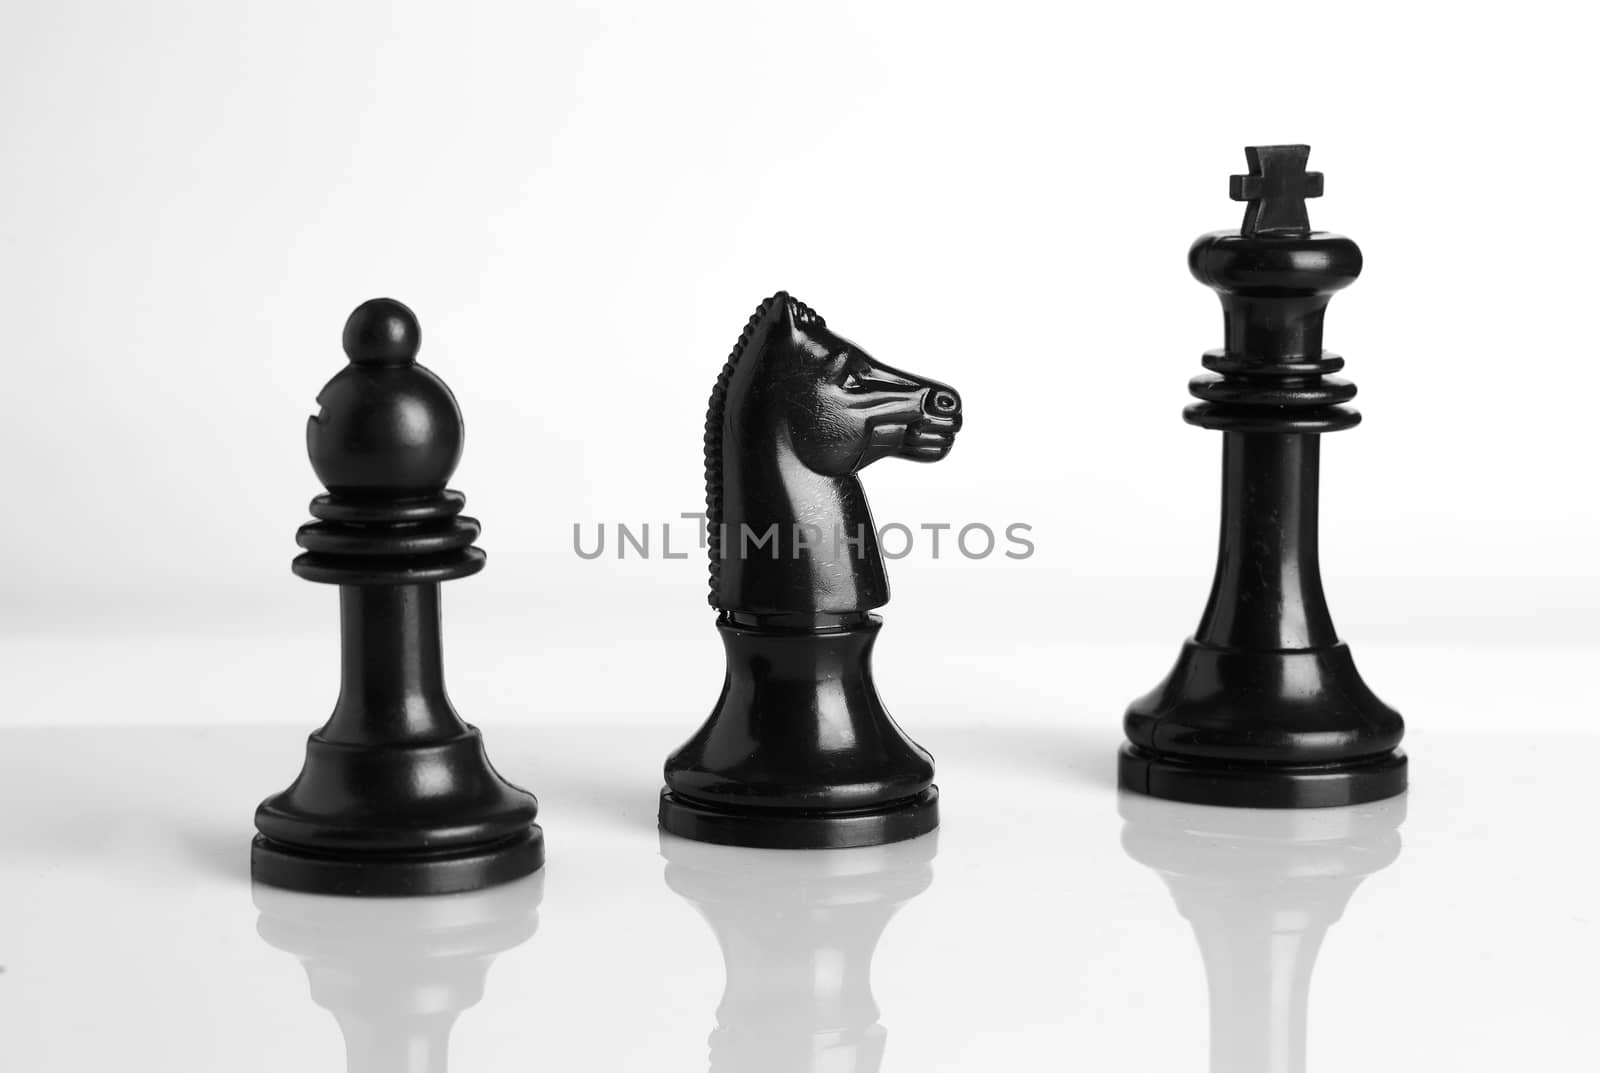 Isolated chess pieces in Black and white by nachrc2001